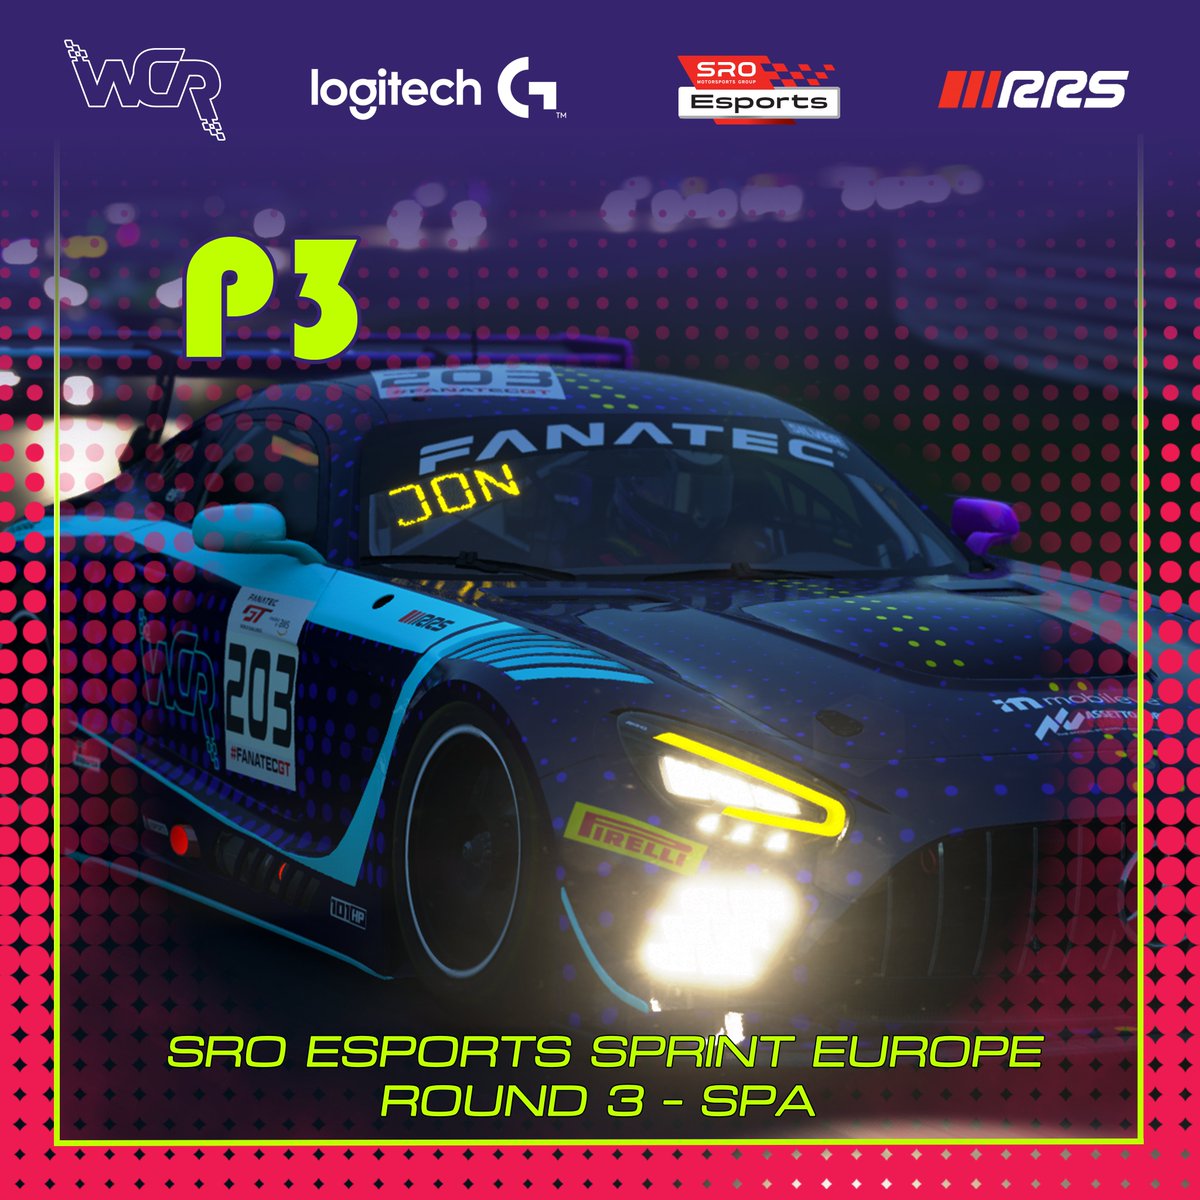 Marco fought brilliantly at Spa to claim his and our team's first SRO eSports Sprint podium! P3 in Silver and two more rounds for an interesting fight at the top.

#SROesports #romanianesports #westcompetitionracing #assettocorsacompetizione #podium #spafrancorchamps